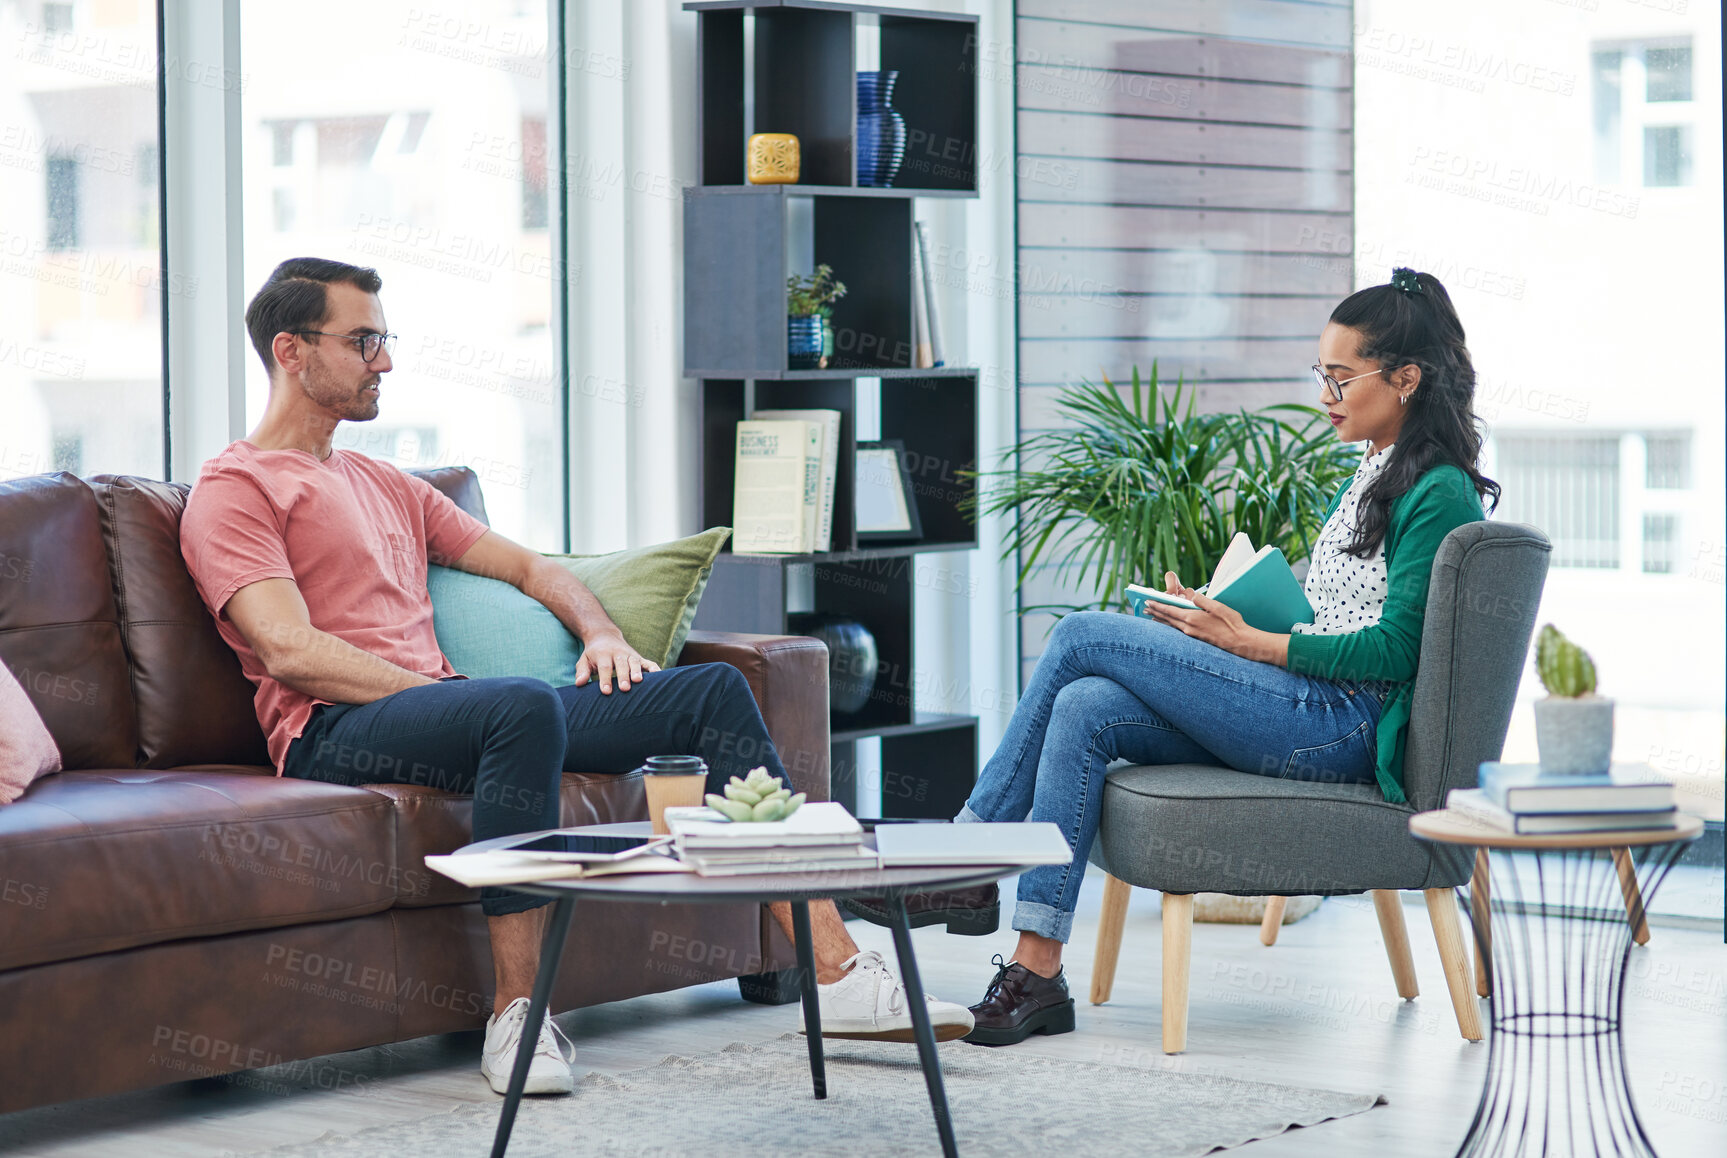 Buy stock photo Shot of a young man and woman having a discussion in a modern office